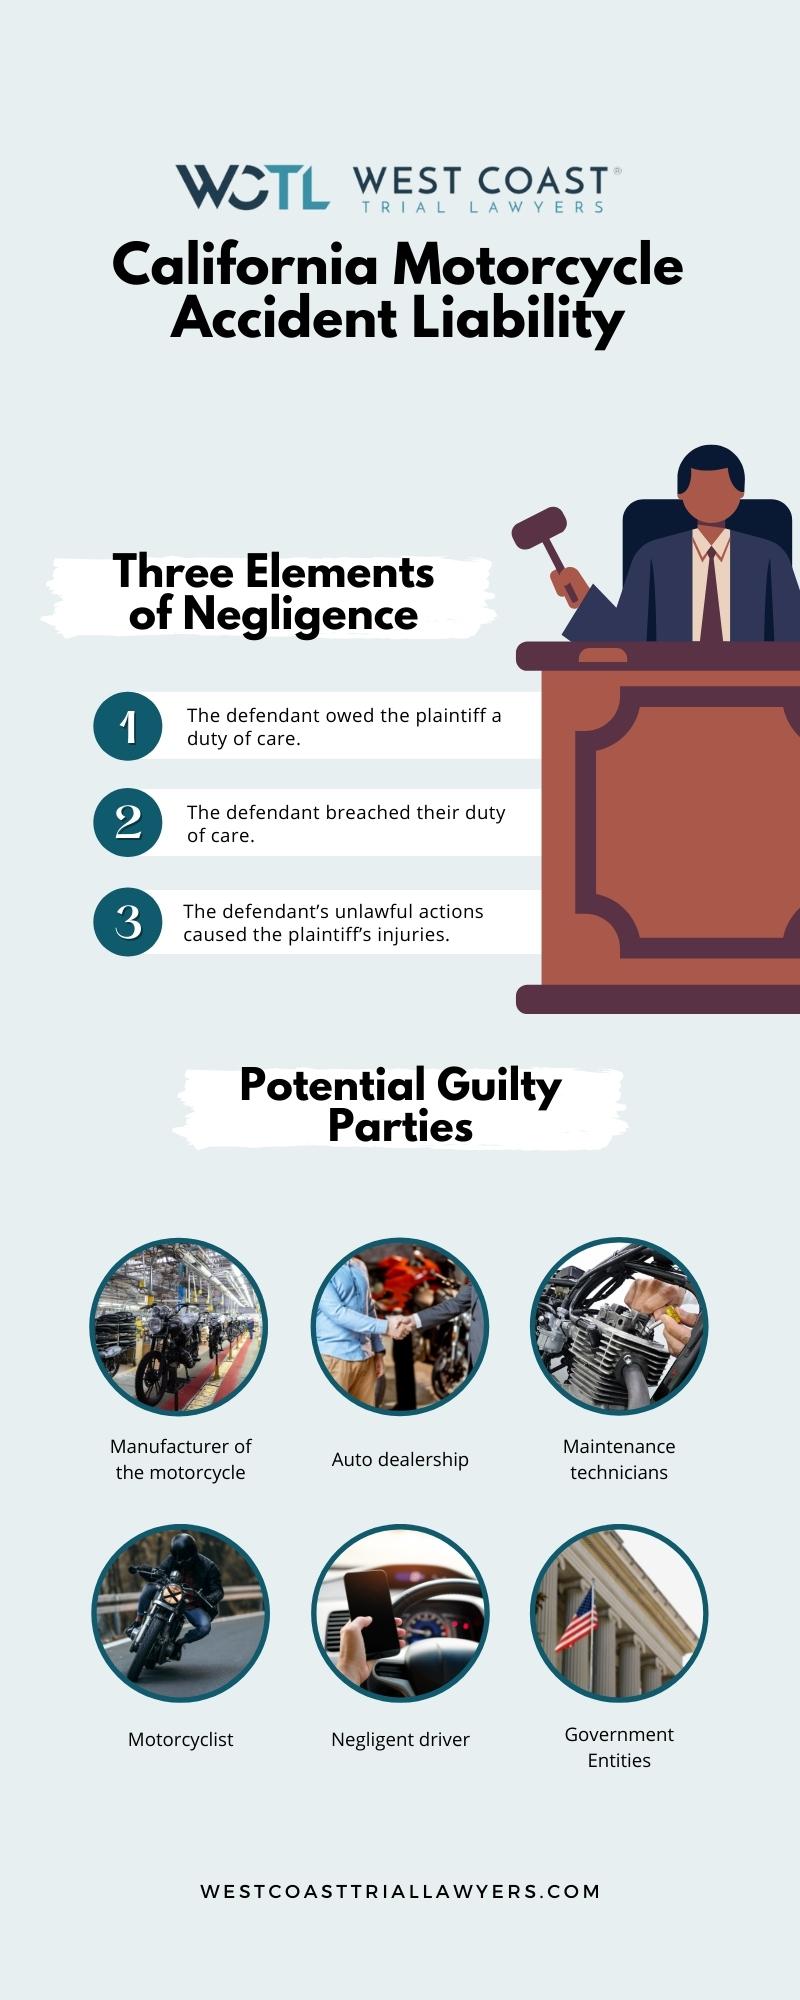 Best motorcycle accident lawyers in California, West Coast Trial Lawyers. An infographic on motorcycle accident liability in California.